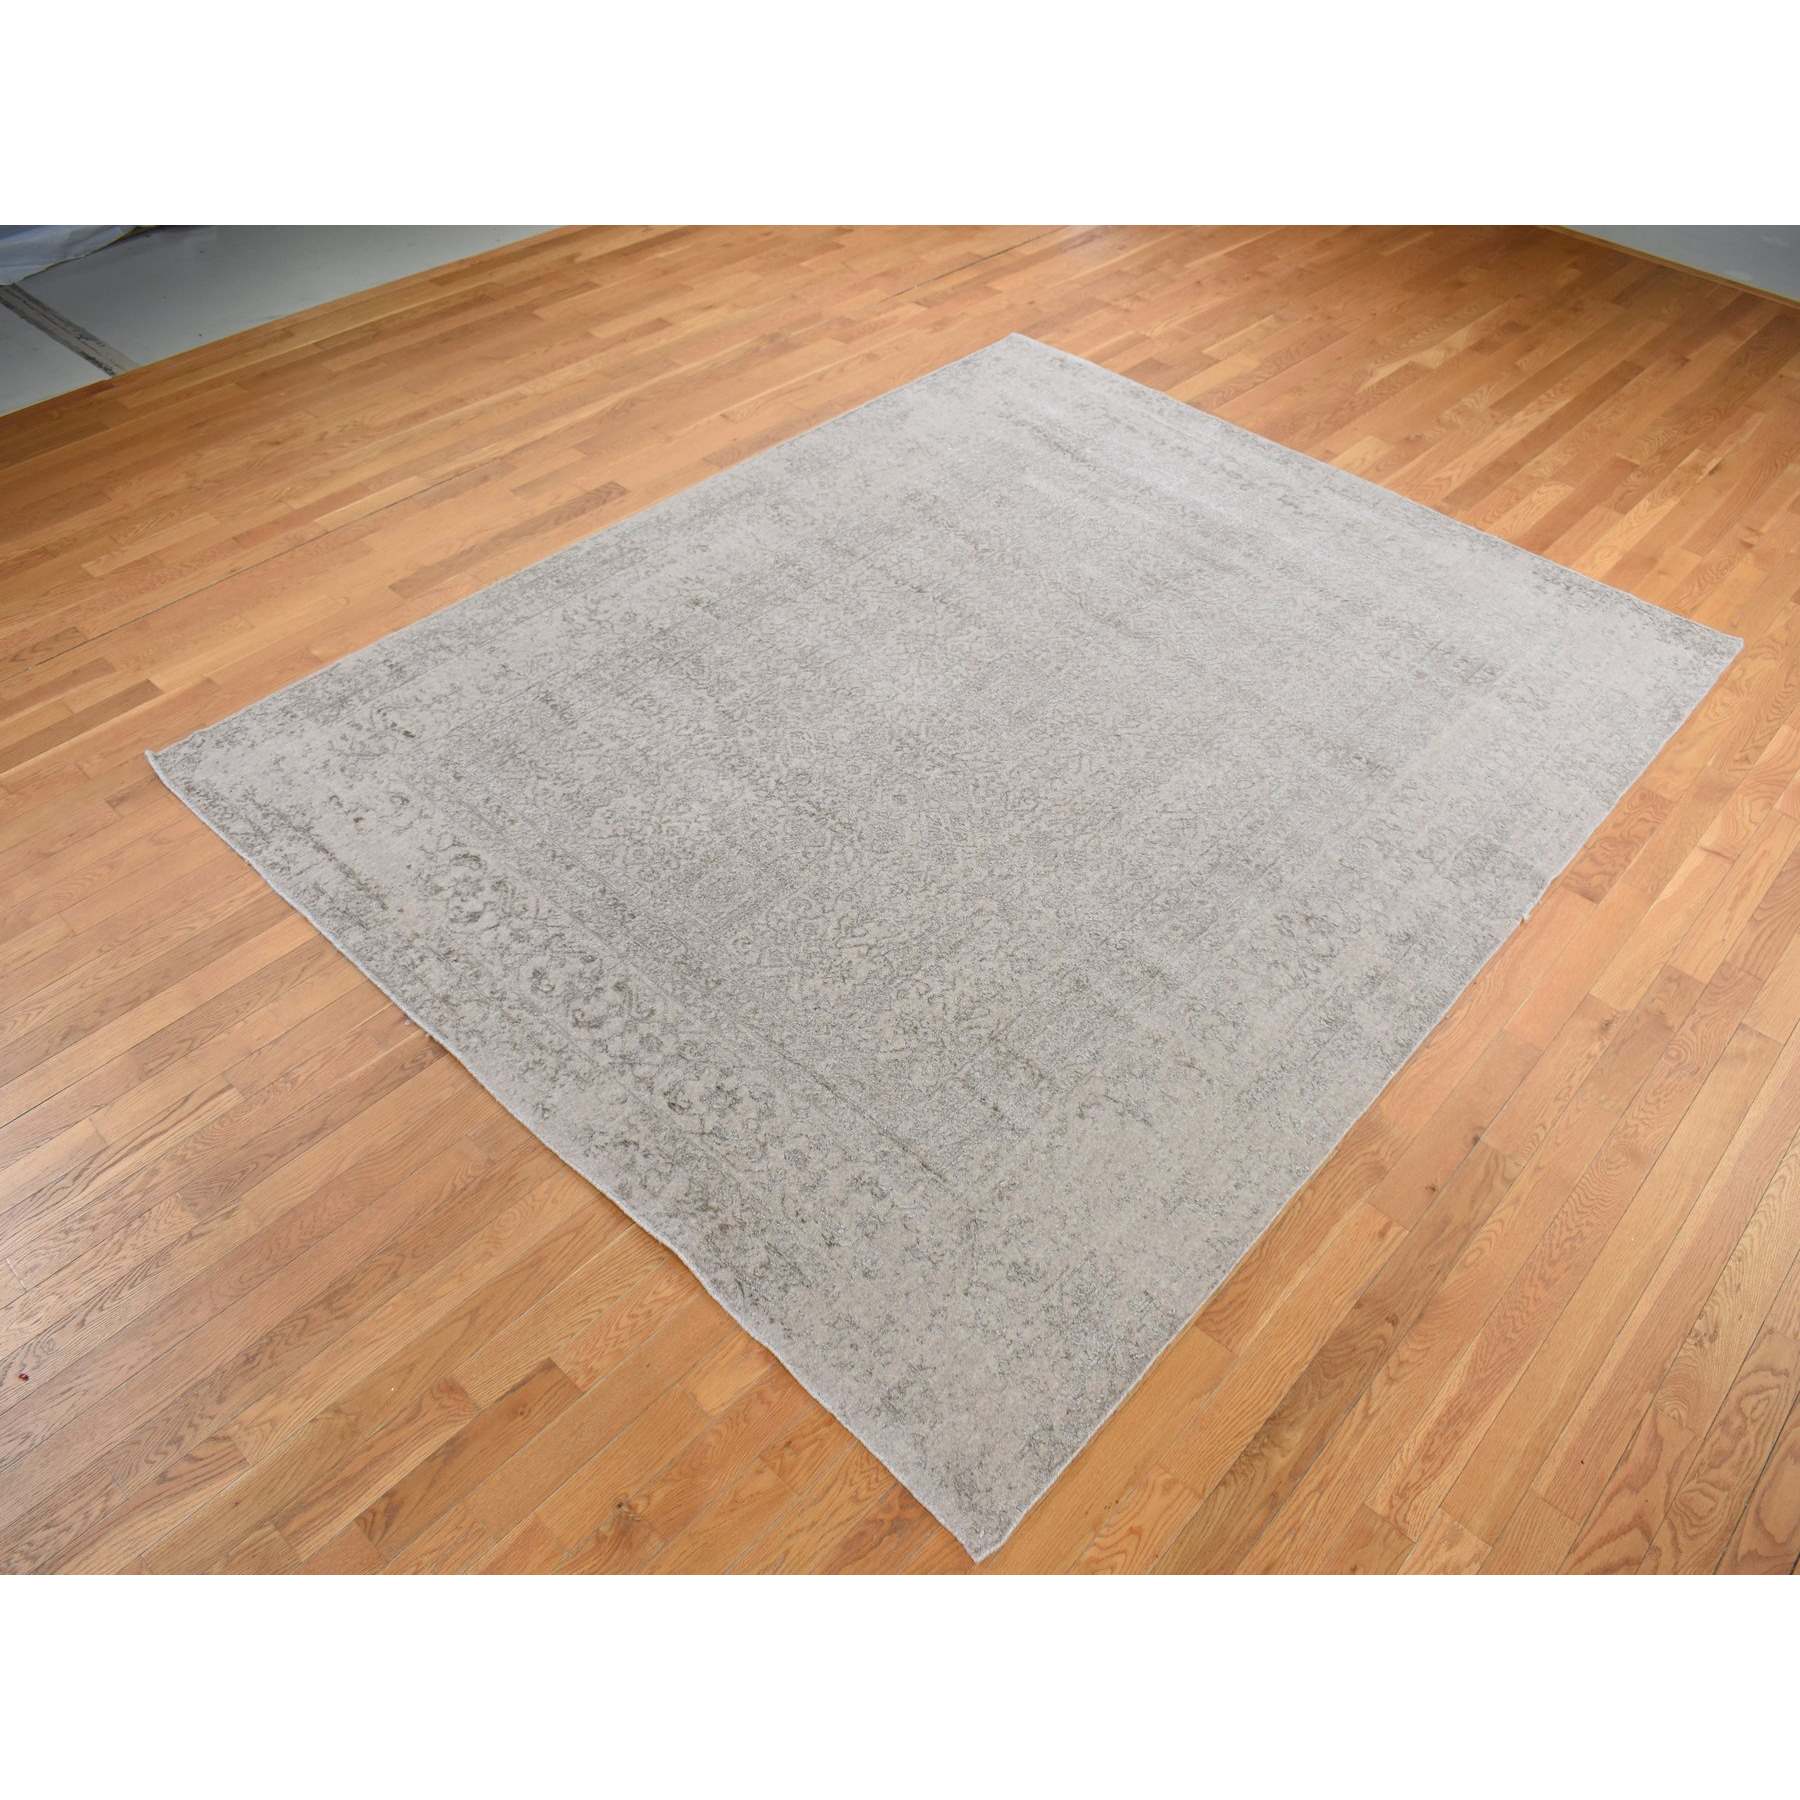 Modern-and-Contemporary-Hand-Loomed-Rug-437845